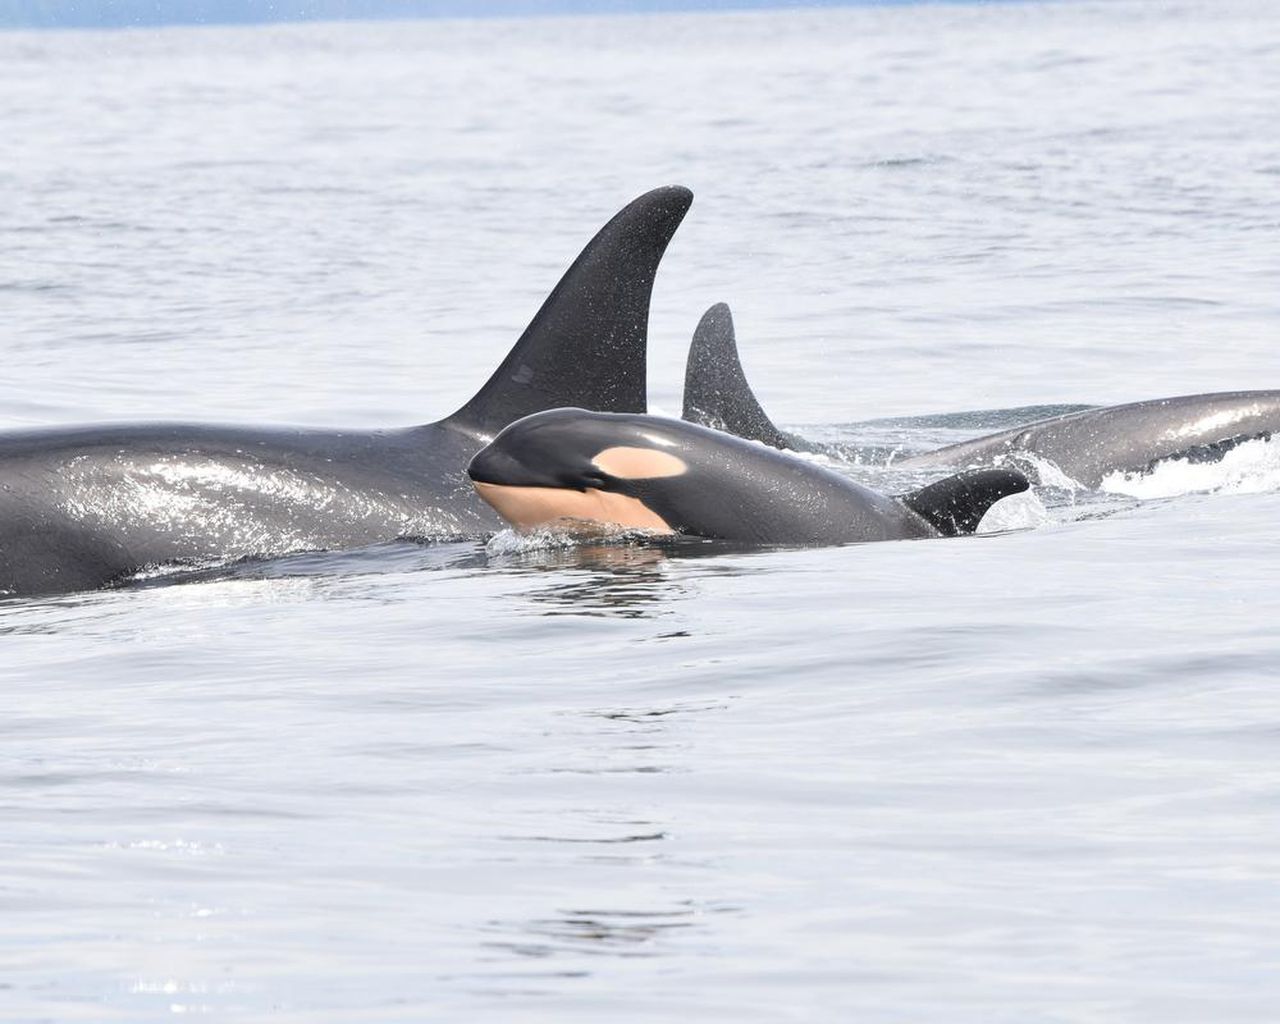 A cute little ball of blubber female baby orca offers hope for bcs endangered killer whales the star